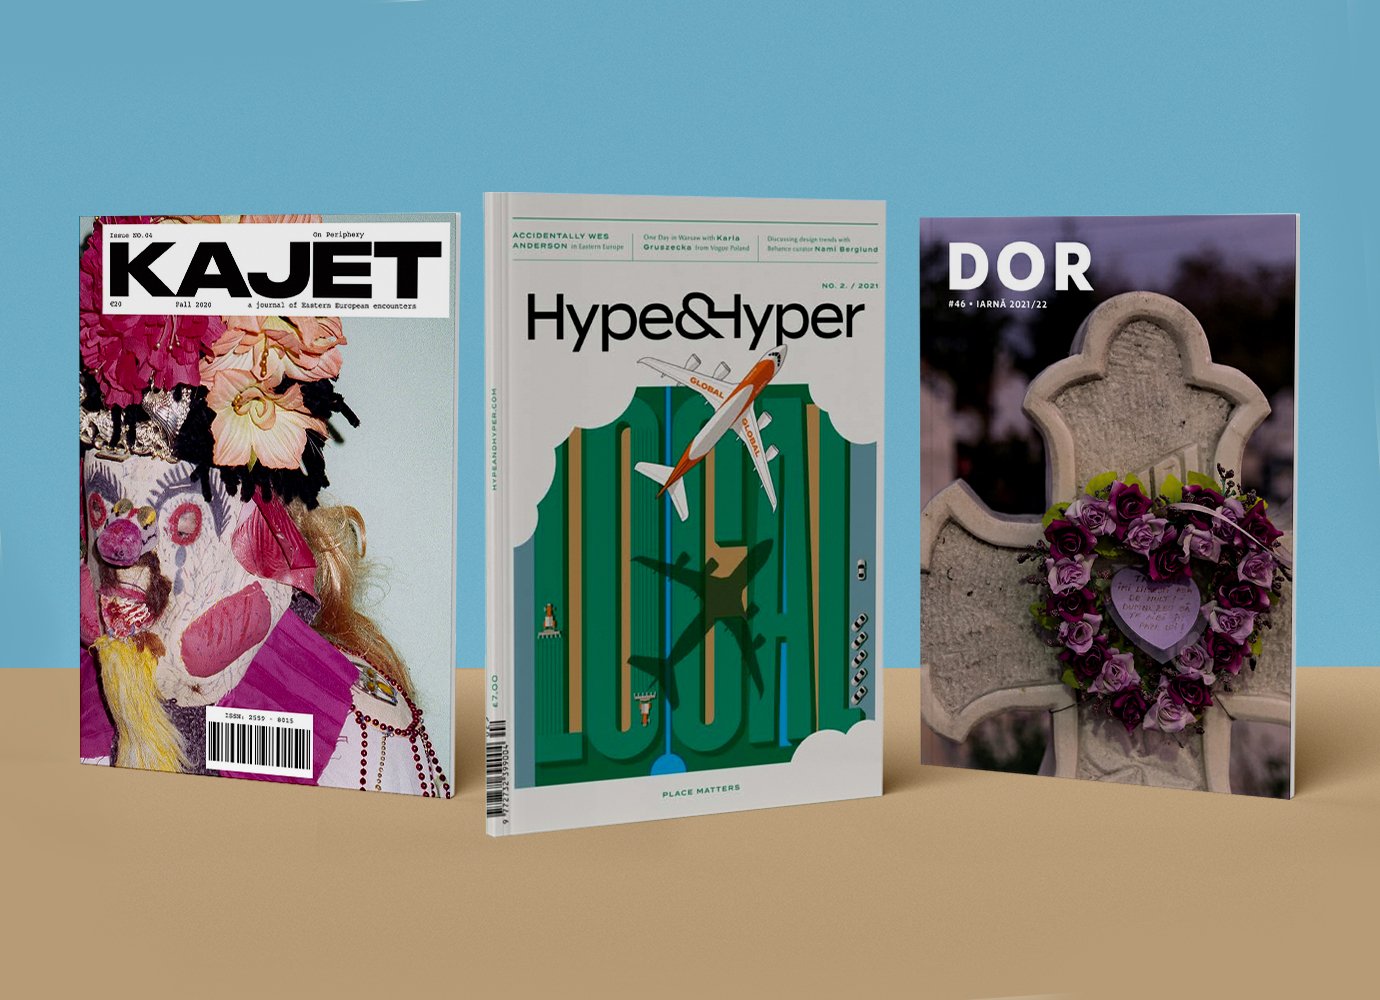 Must-read media: 10 of the best English-language magazines from across Eastern Europe and Central Asia